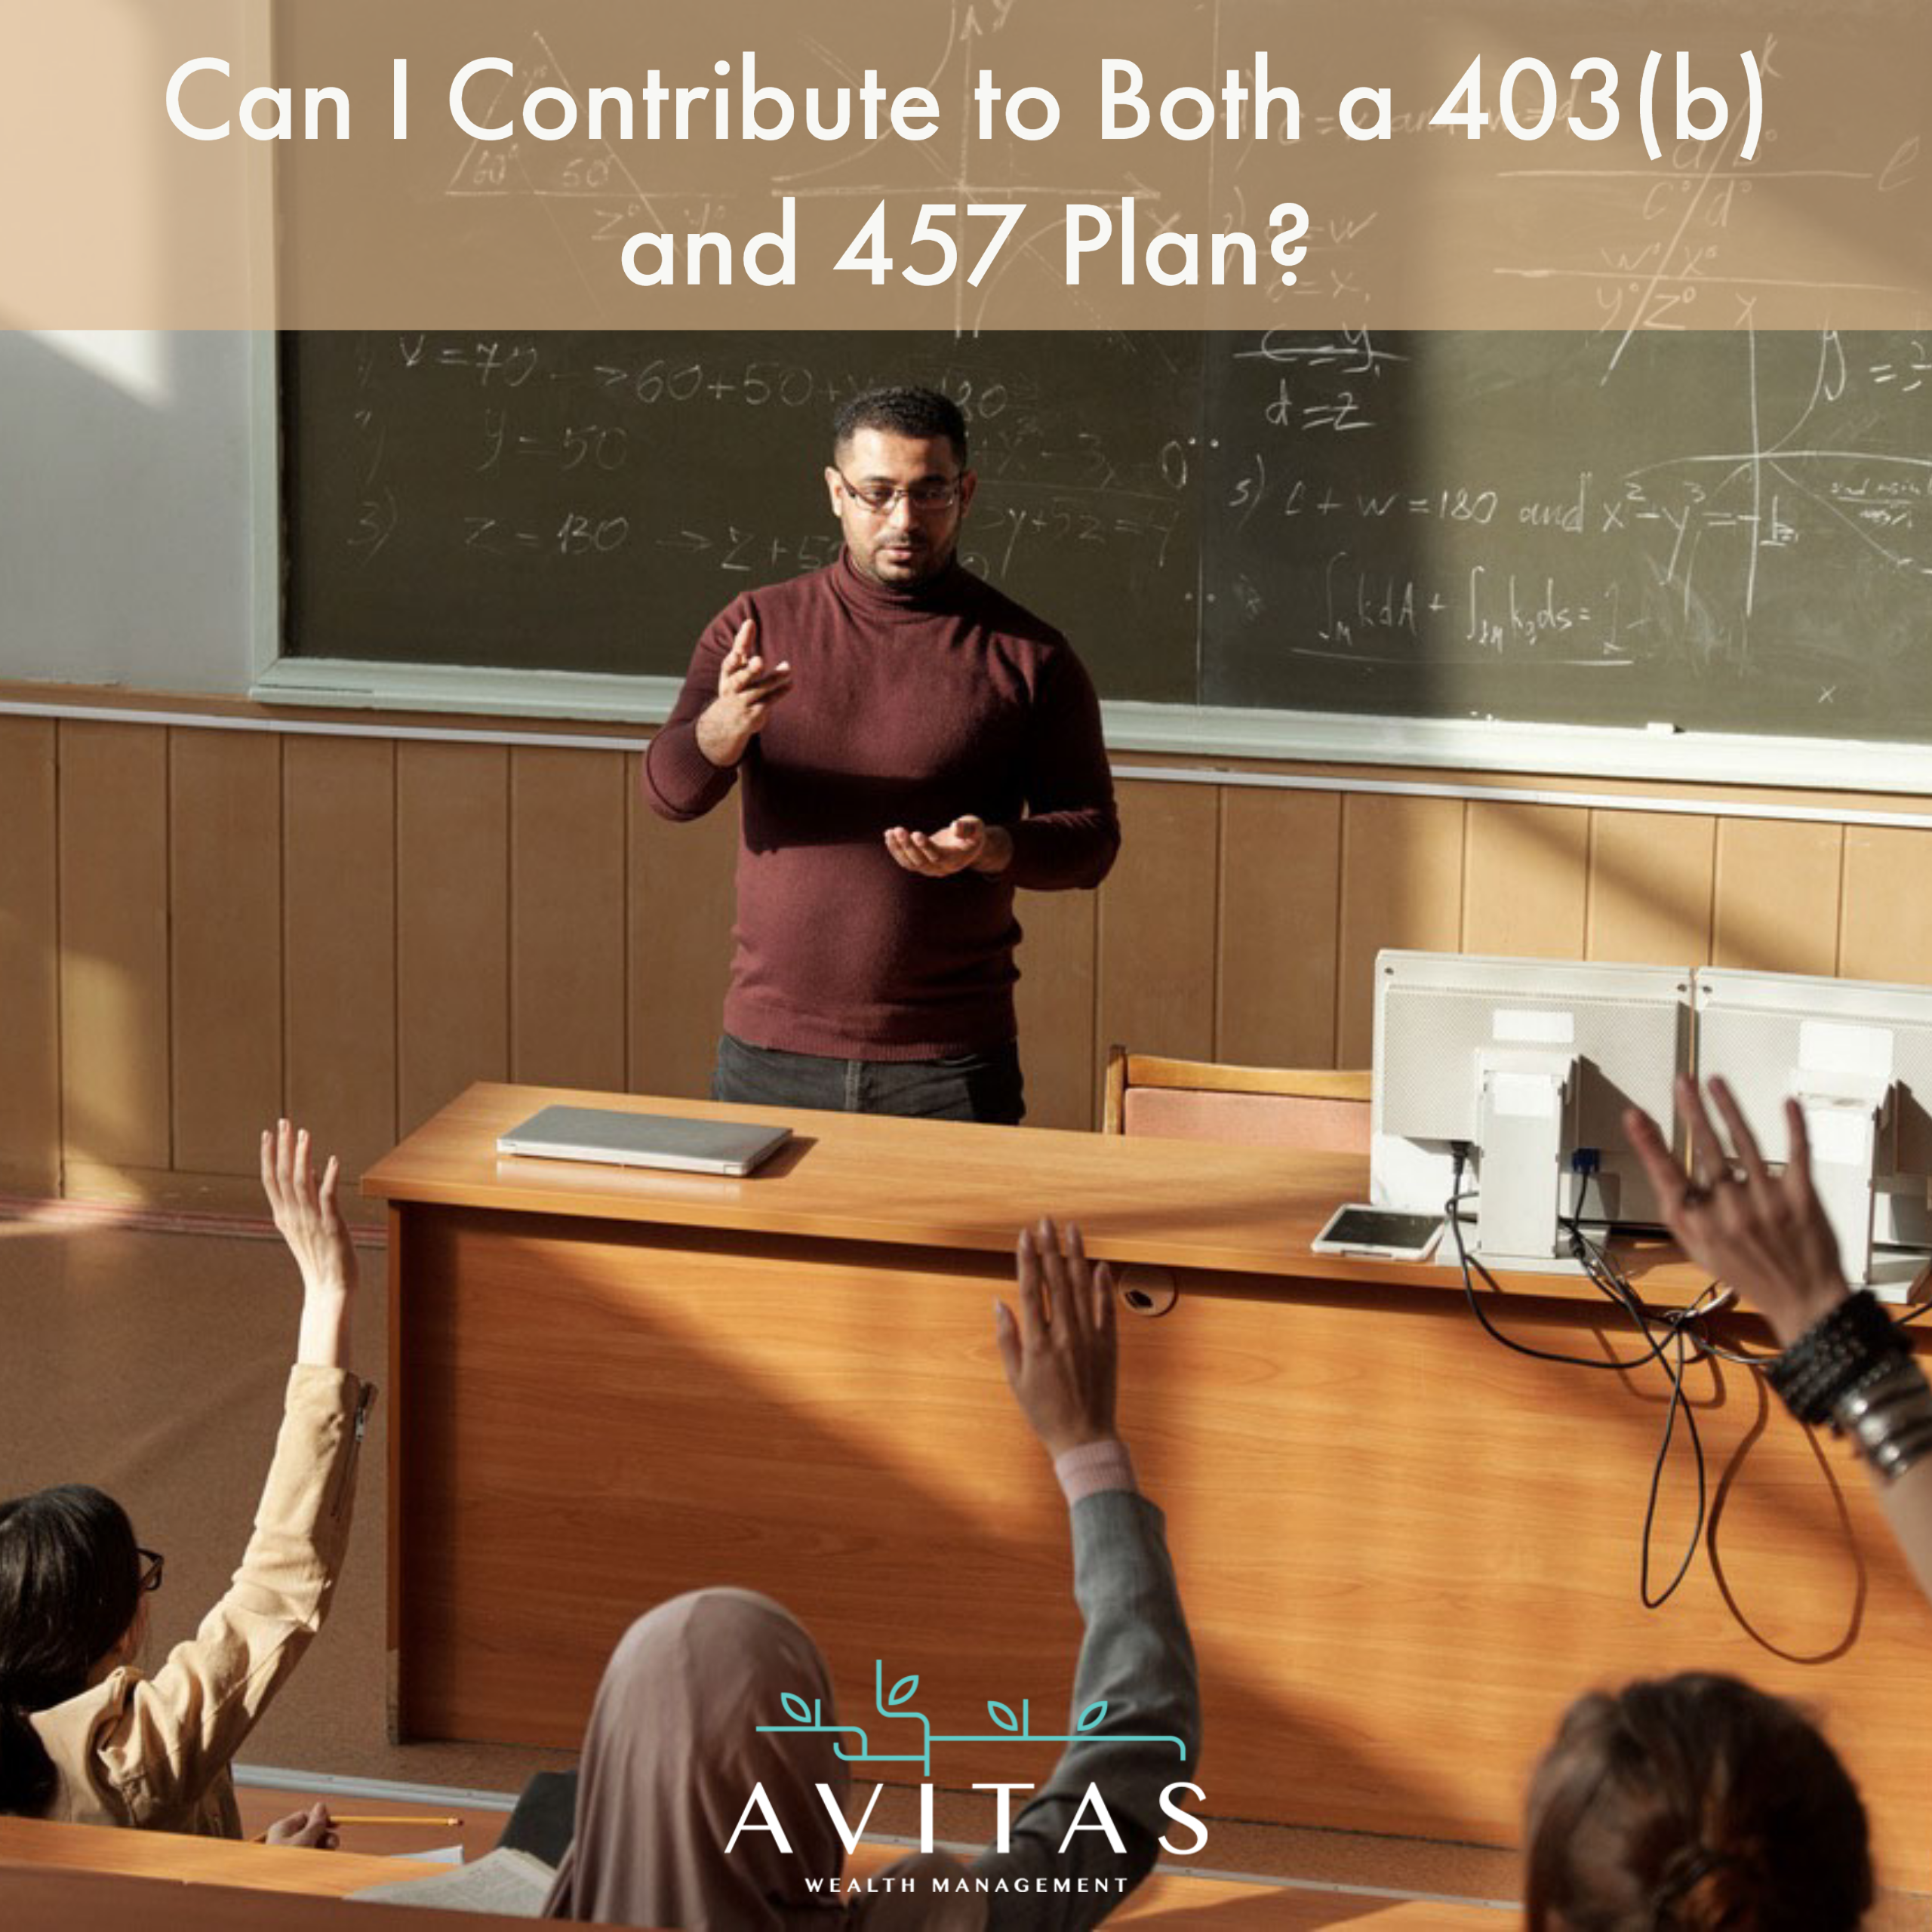 Can I Contribute to Both a 403(b) and 457 Plan?